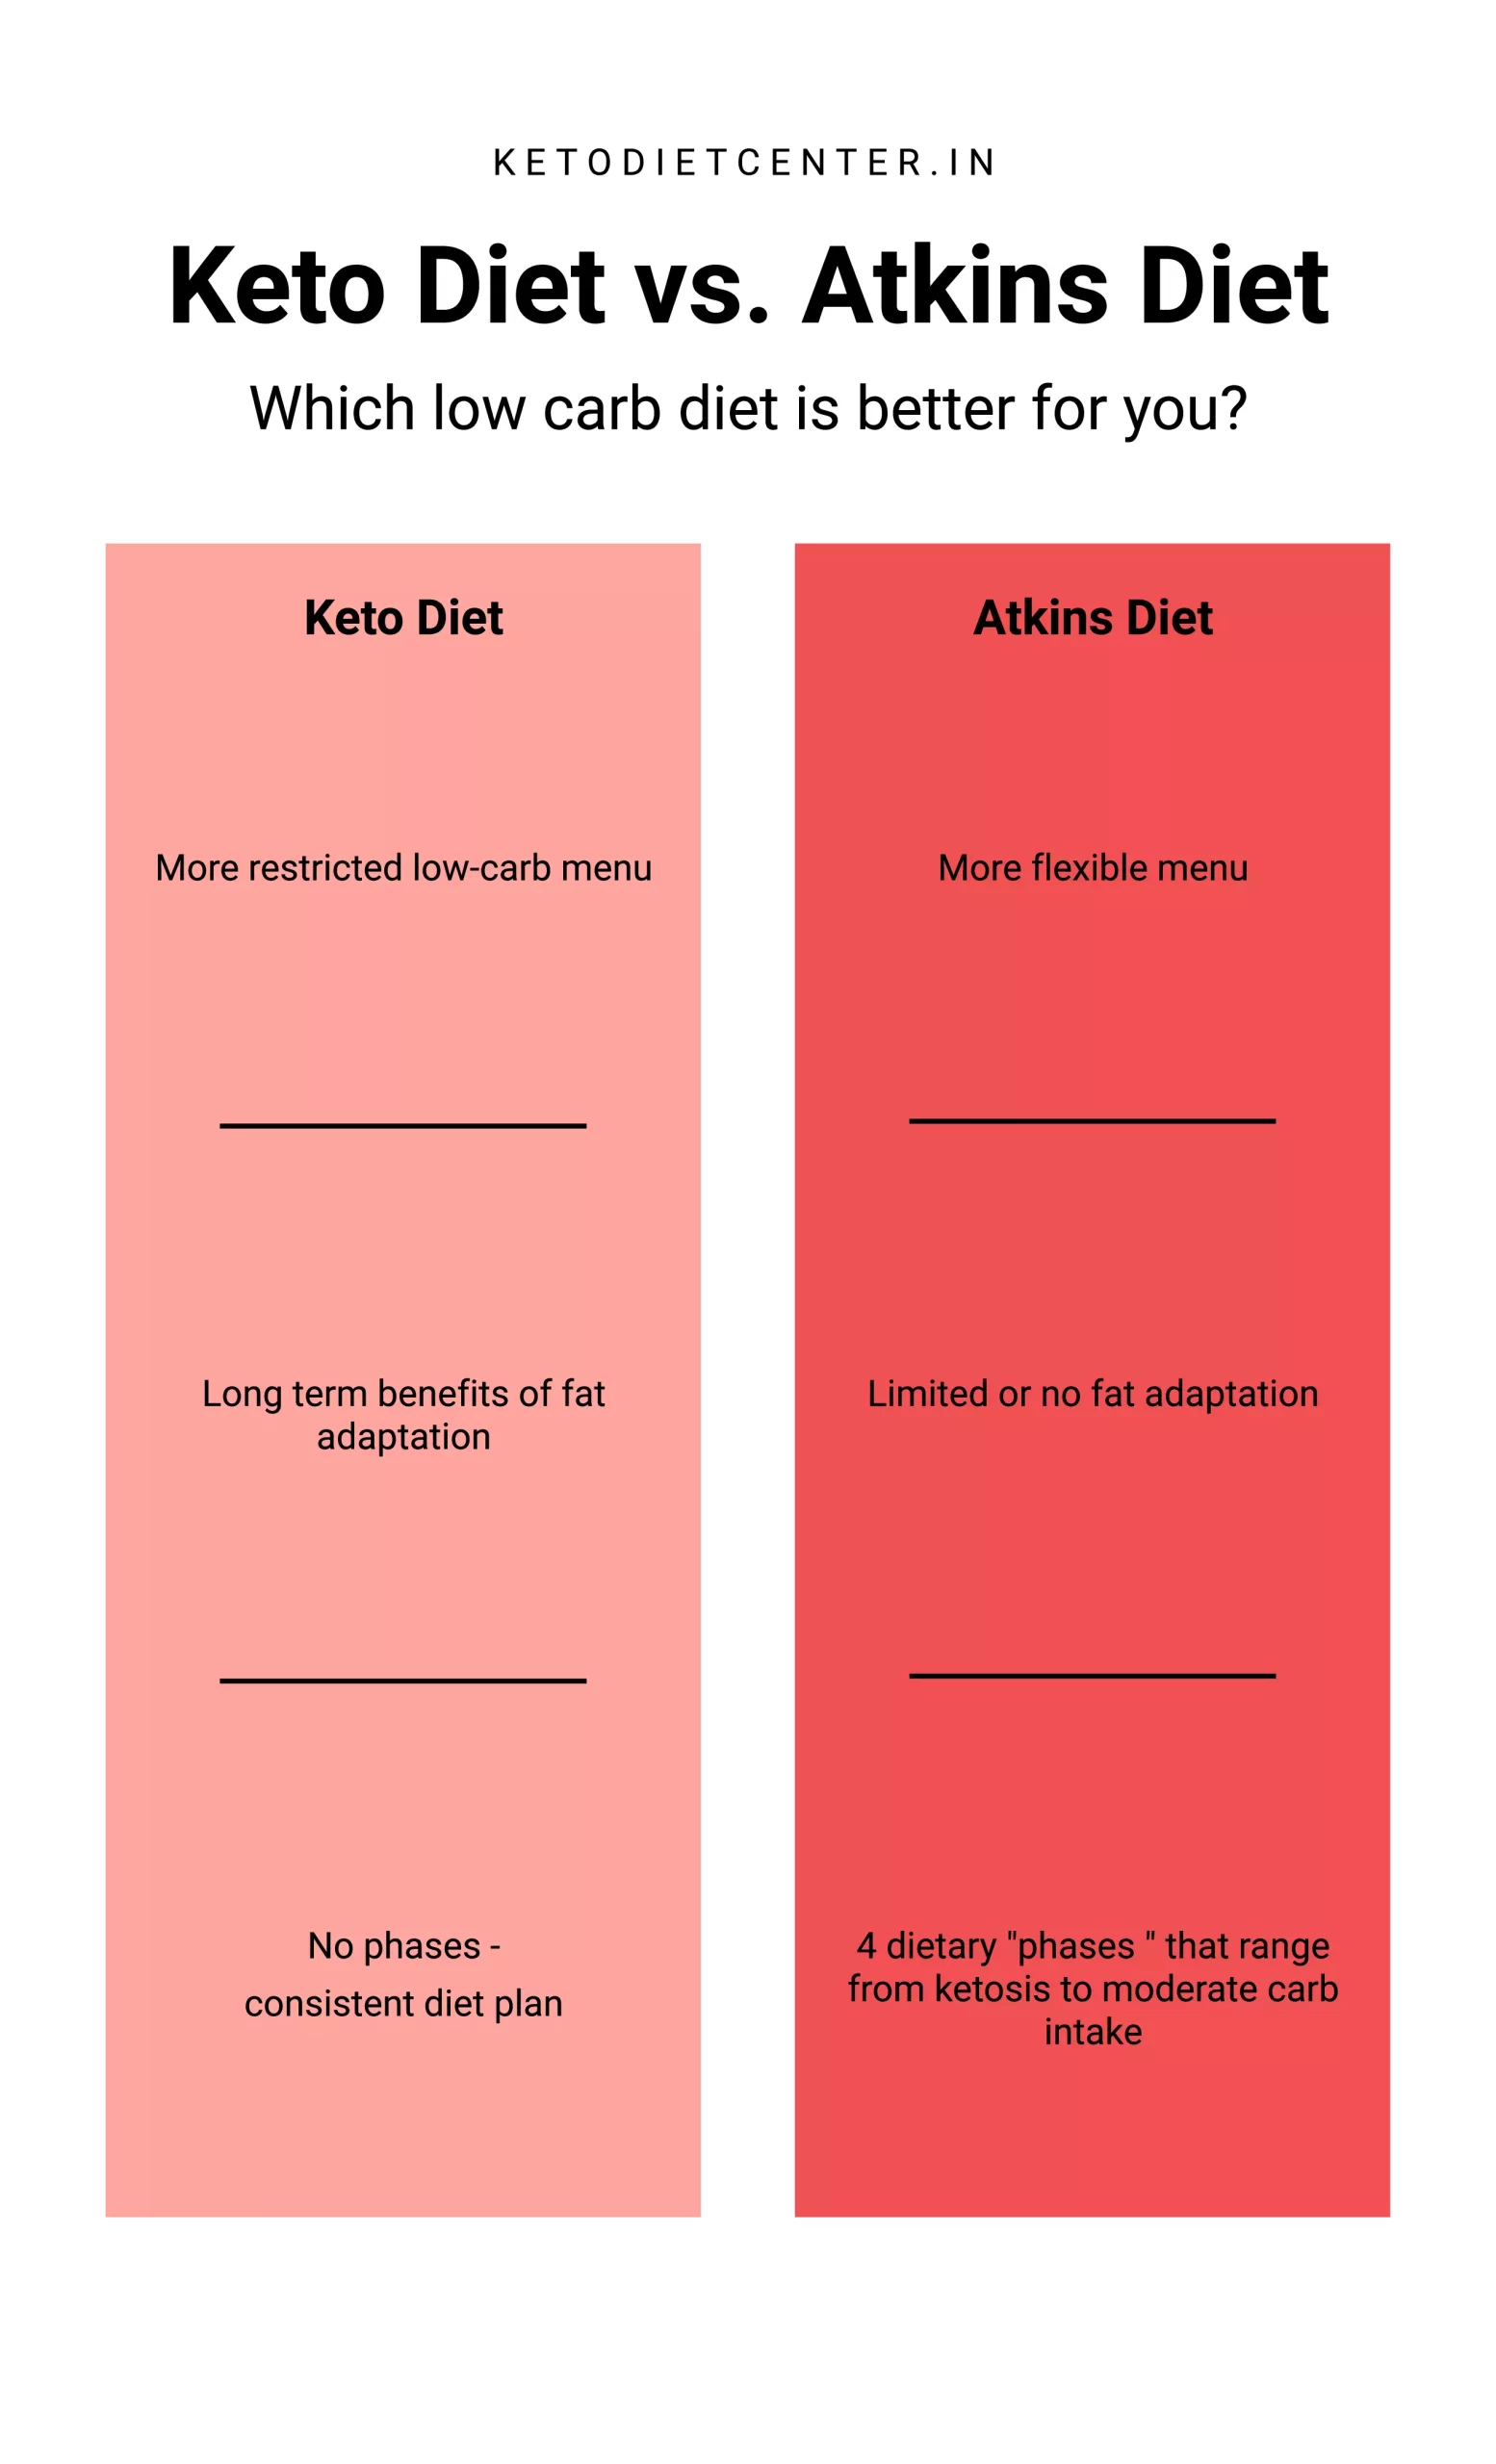 Differences Between Keto and Atkins